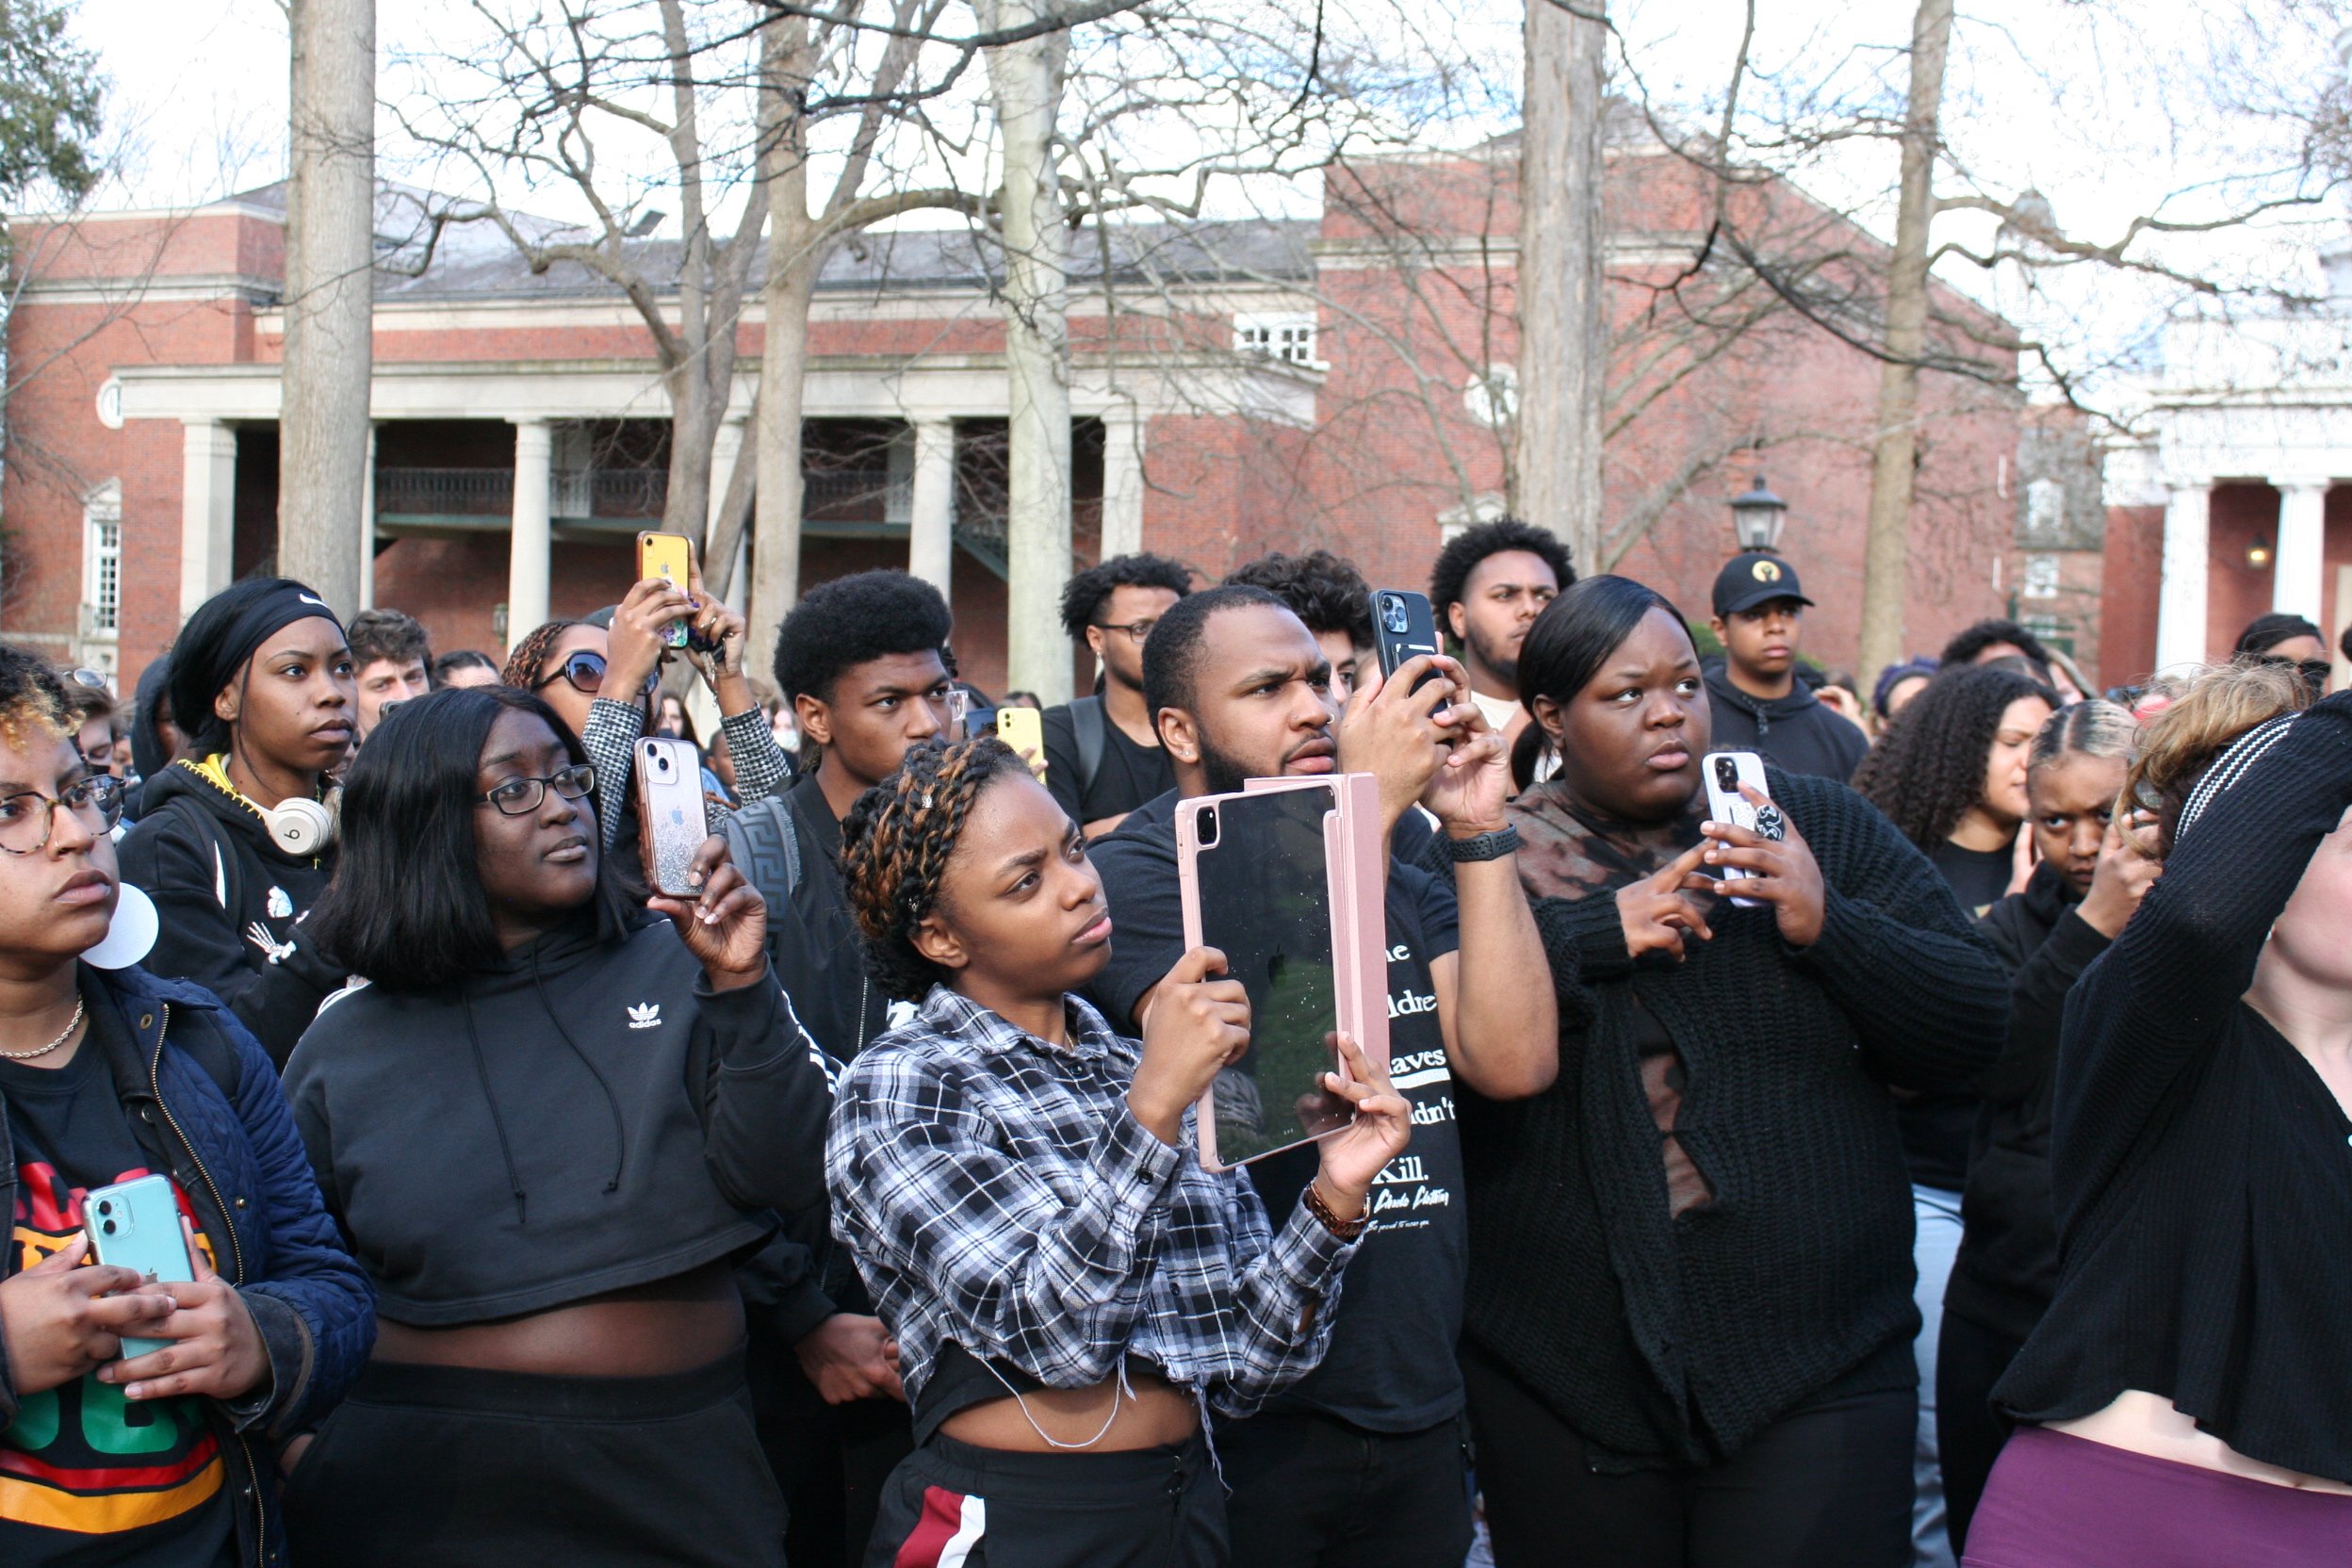  Students videotape and livestream Ohio University President Sherman’s address to the protesters. Photo by Audrianna Wilde. 